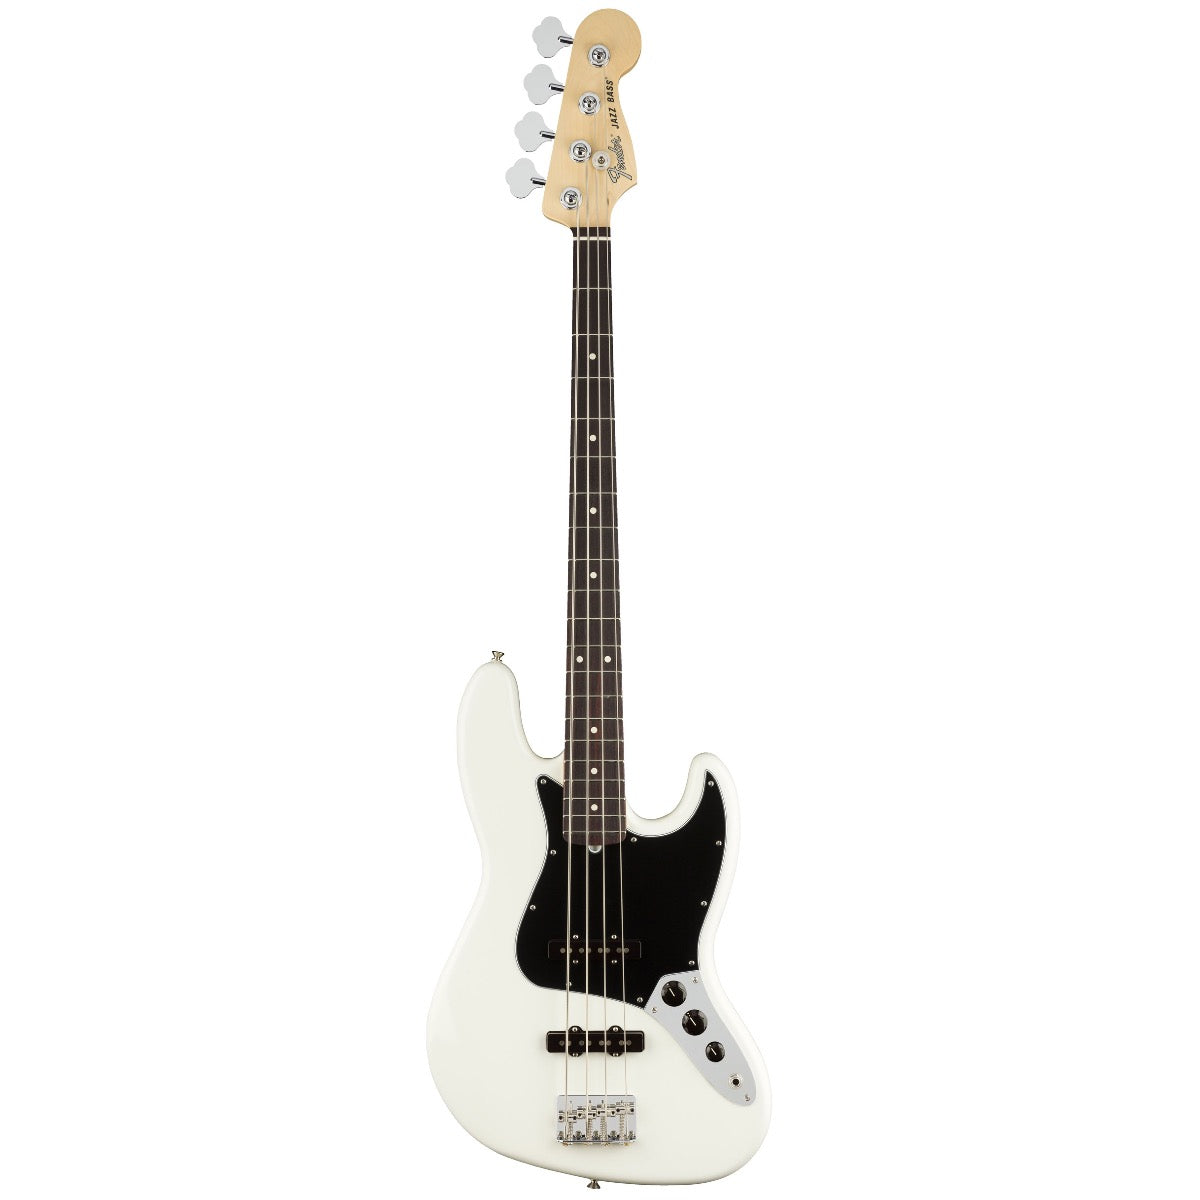 Fender American Performer Jazz Bass in Arctic White